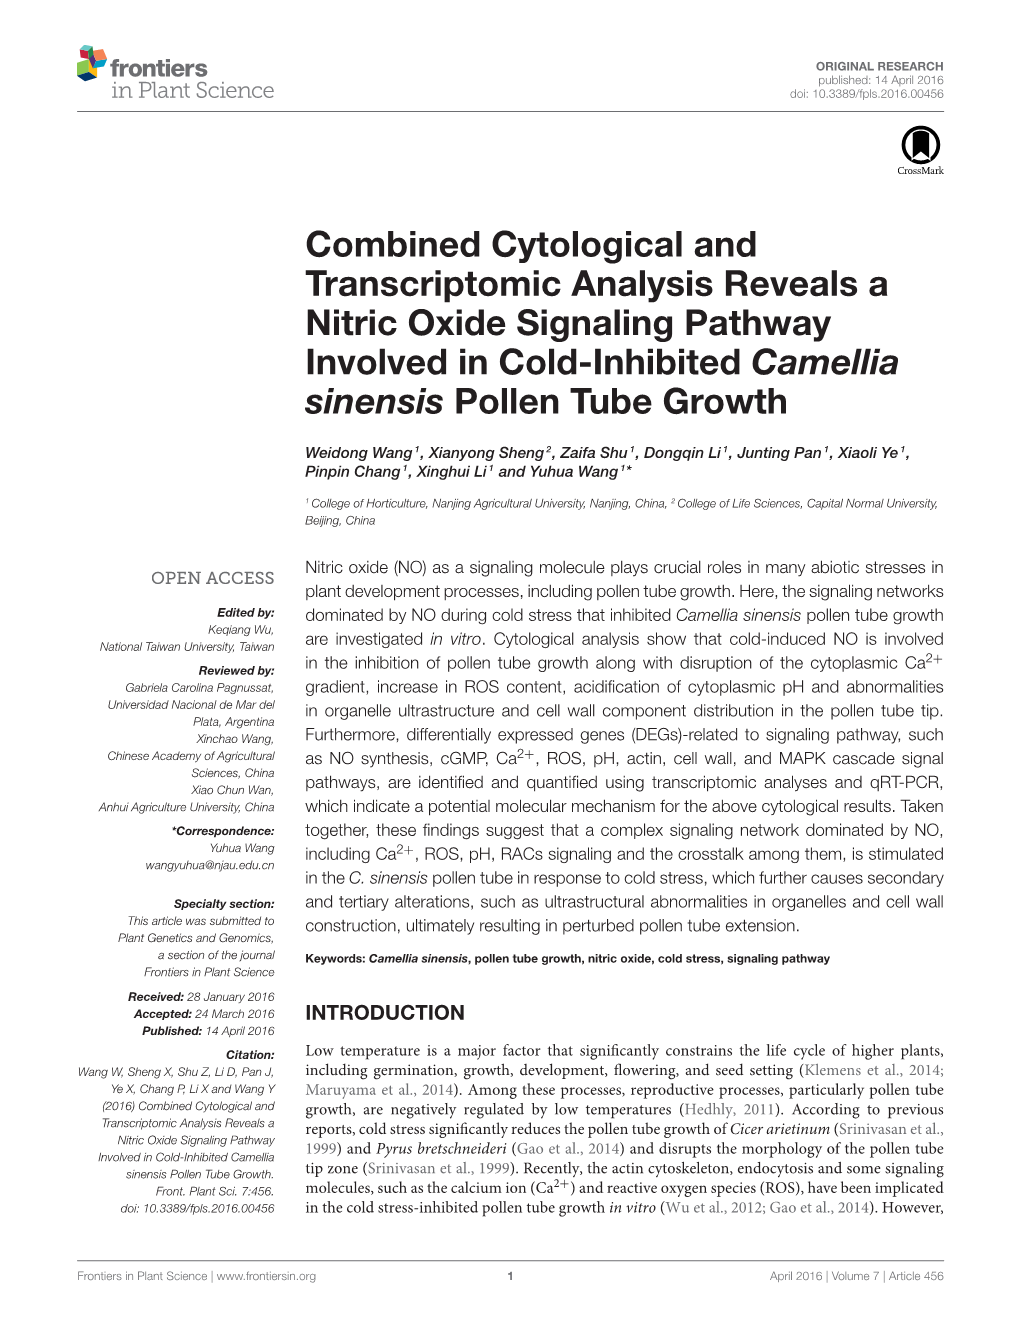 Combined Cytological and Transcriptomic Analysis Reveals a Nitric Oxide Signaling Pathway Involved in Cold-Inhibited Camellia Sinensis Pollen Tube Growth